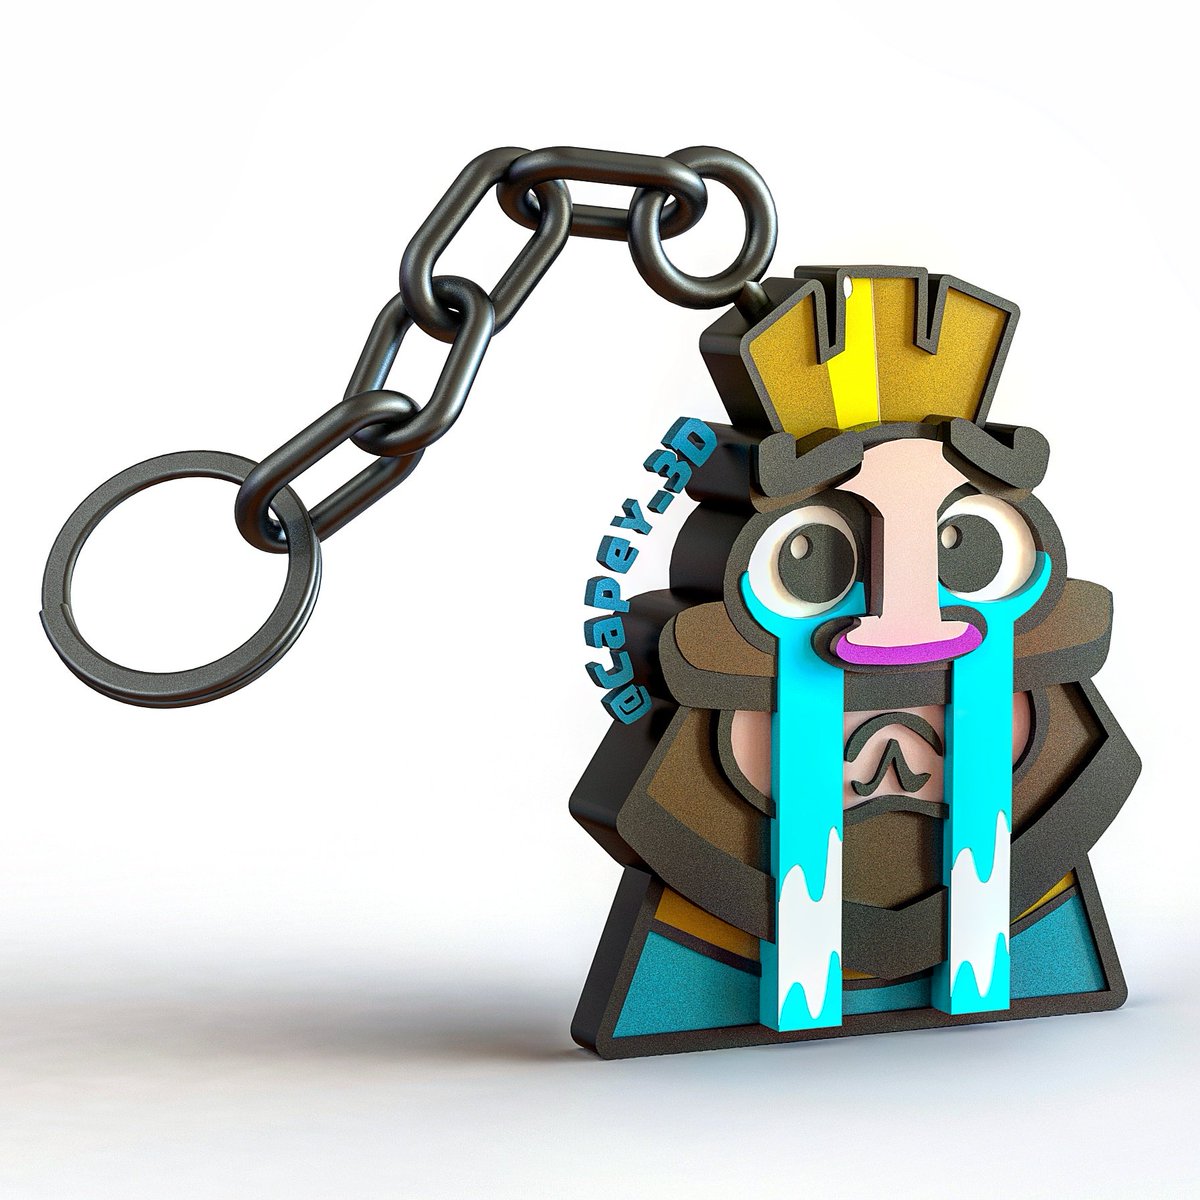 Clash Royale King Cry Emote by ShelvingSendChamber99791